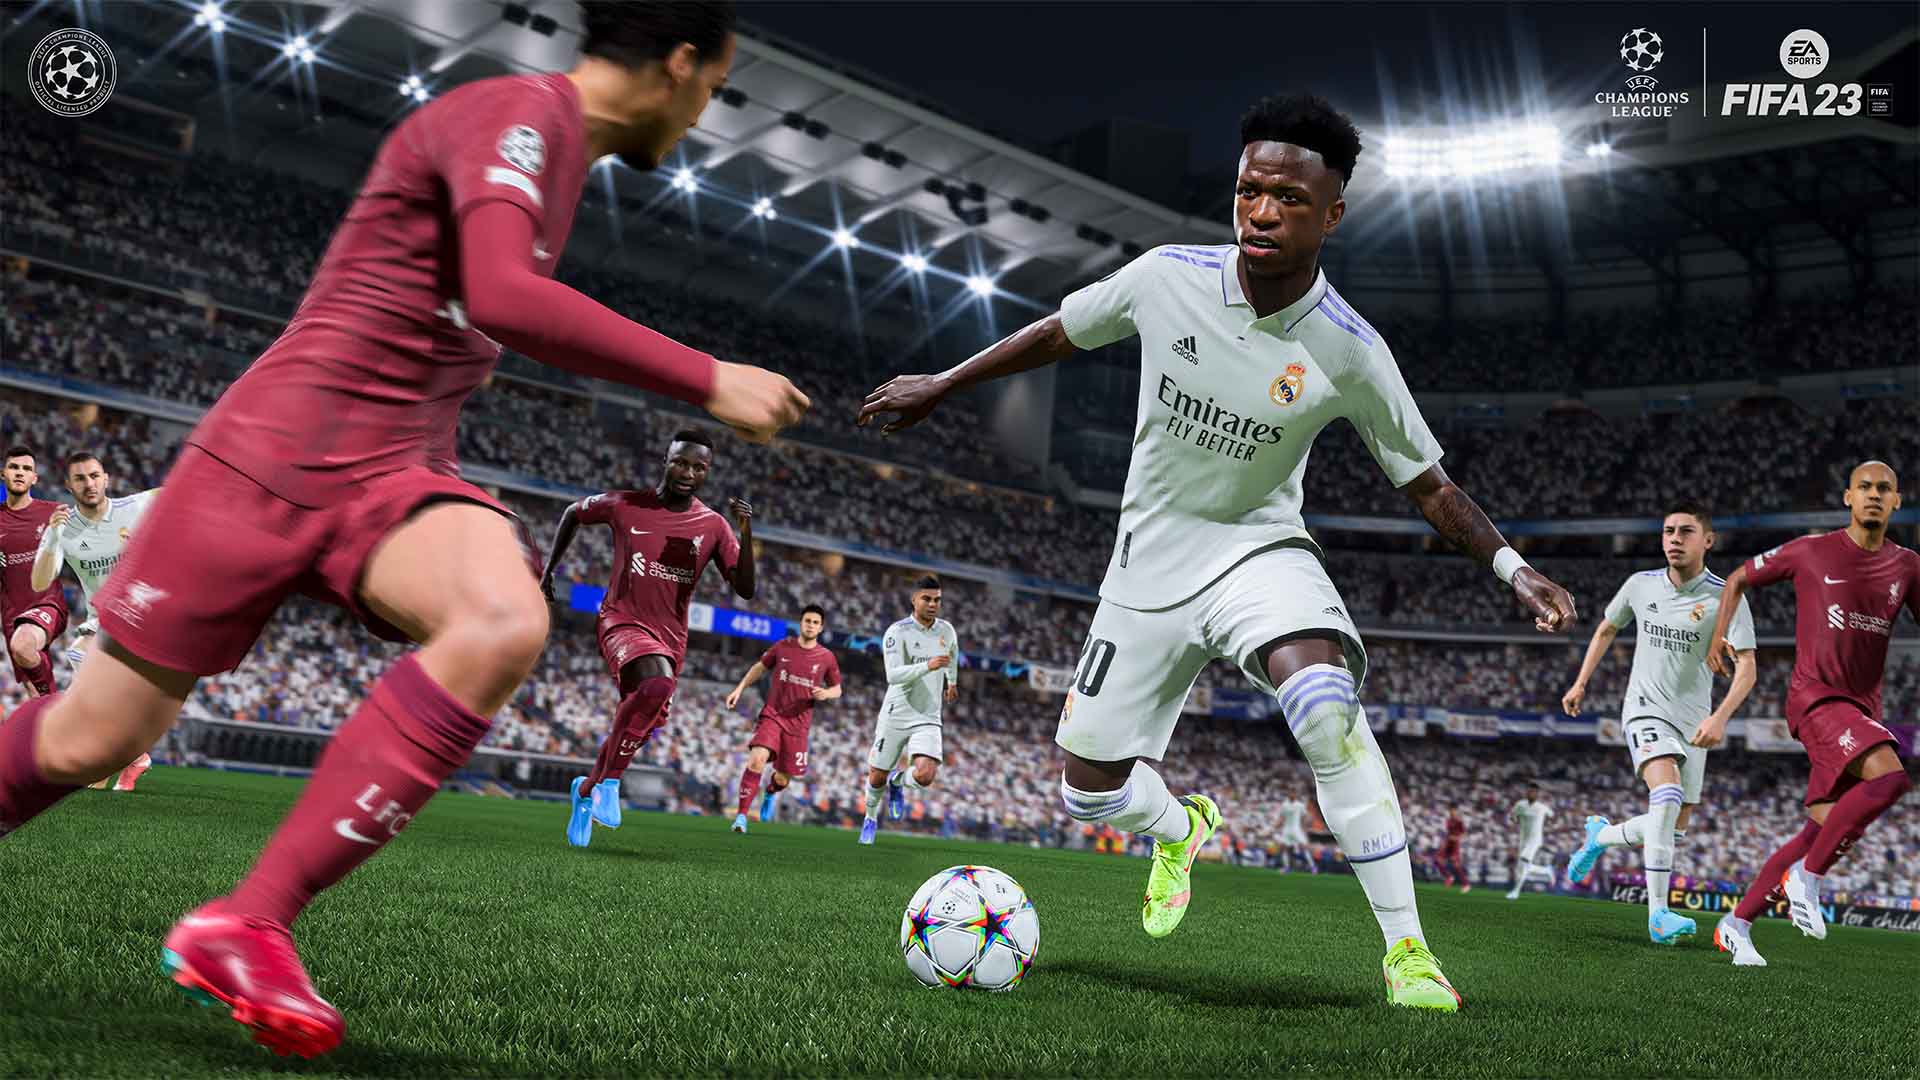 FIFA 23 on Steam Deck: Why it's near impossible to run the game on